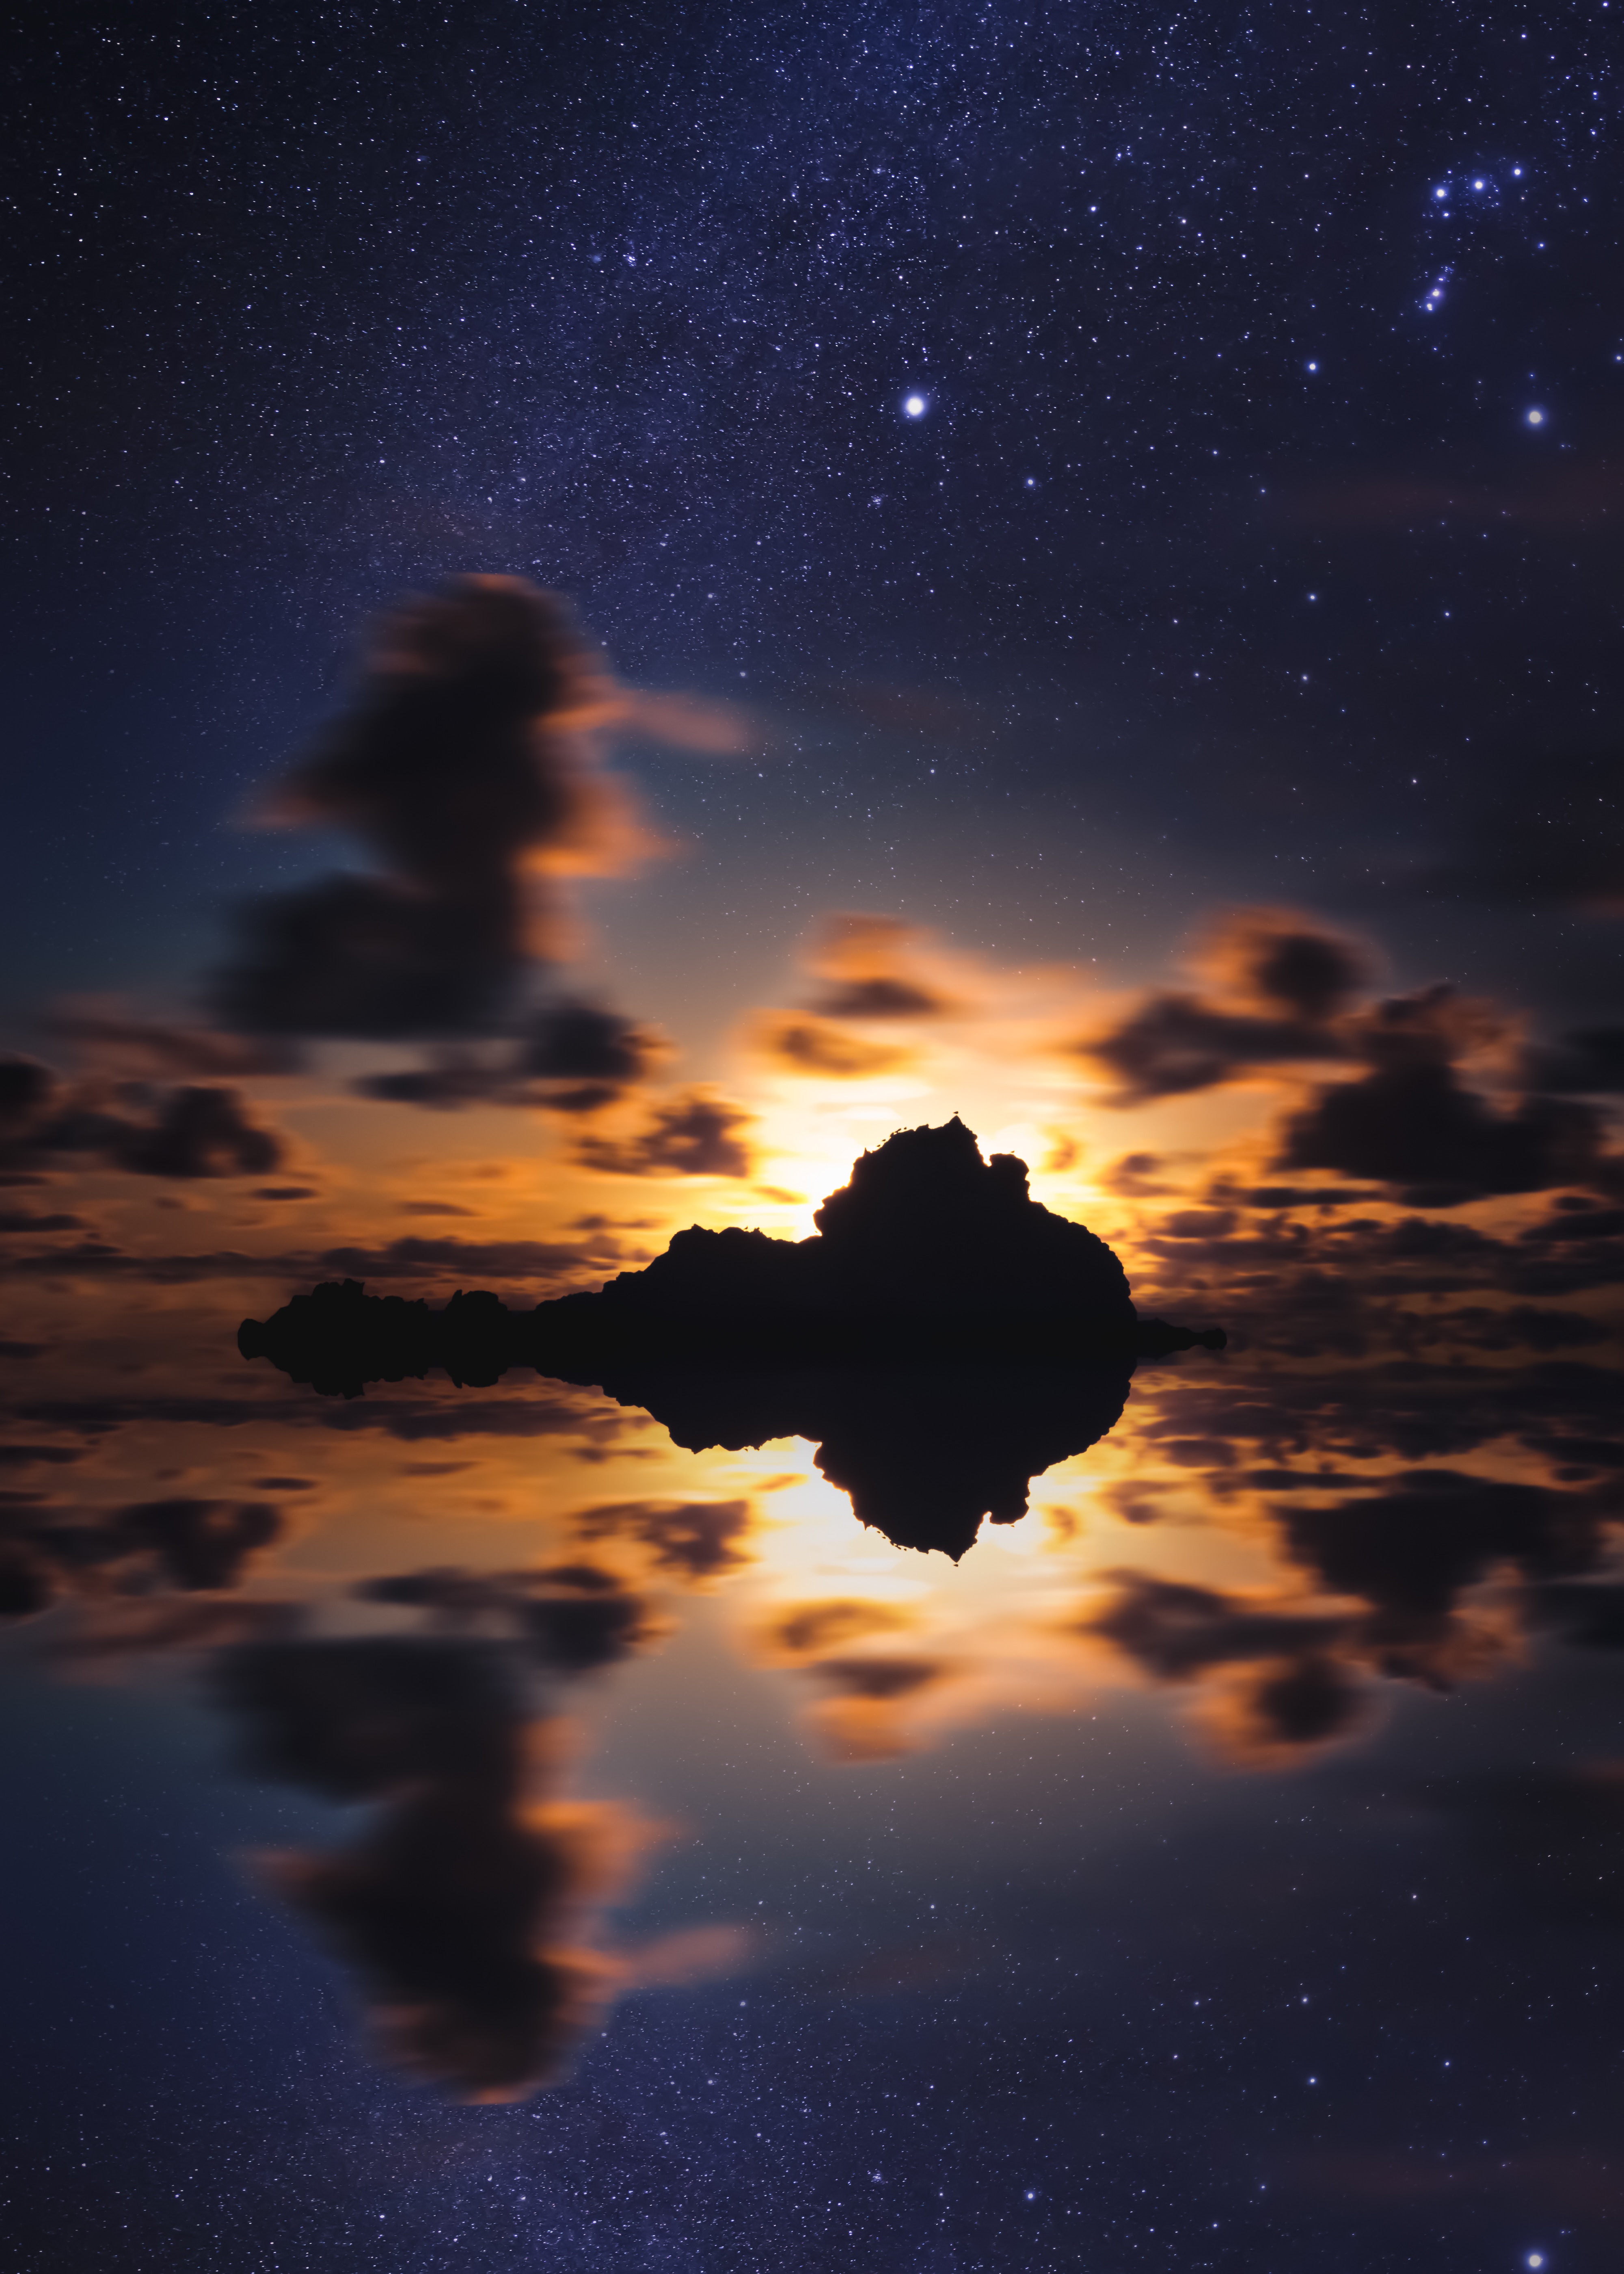 Wallpaper for mobile devices nature, horizon, starry sky, stars